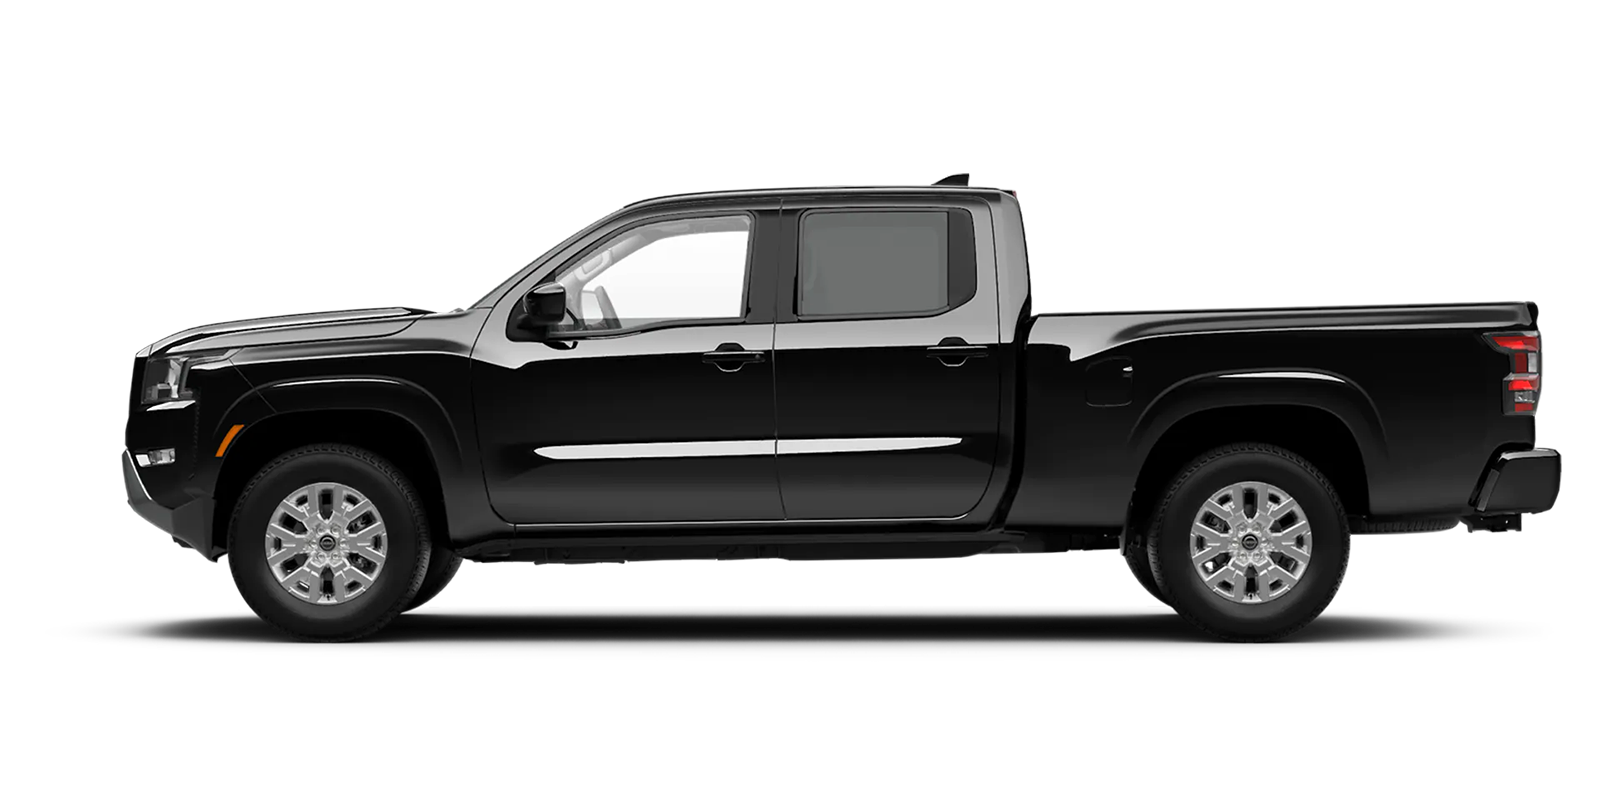 2022 Frontier Crew Cab Long Bed SV 4x2 in Super Black | Romeo Nissan in Kingston NY